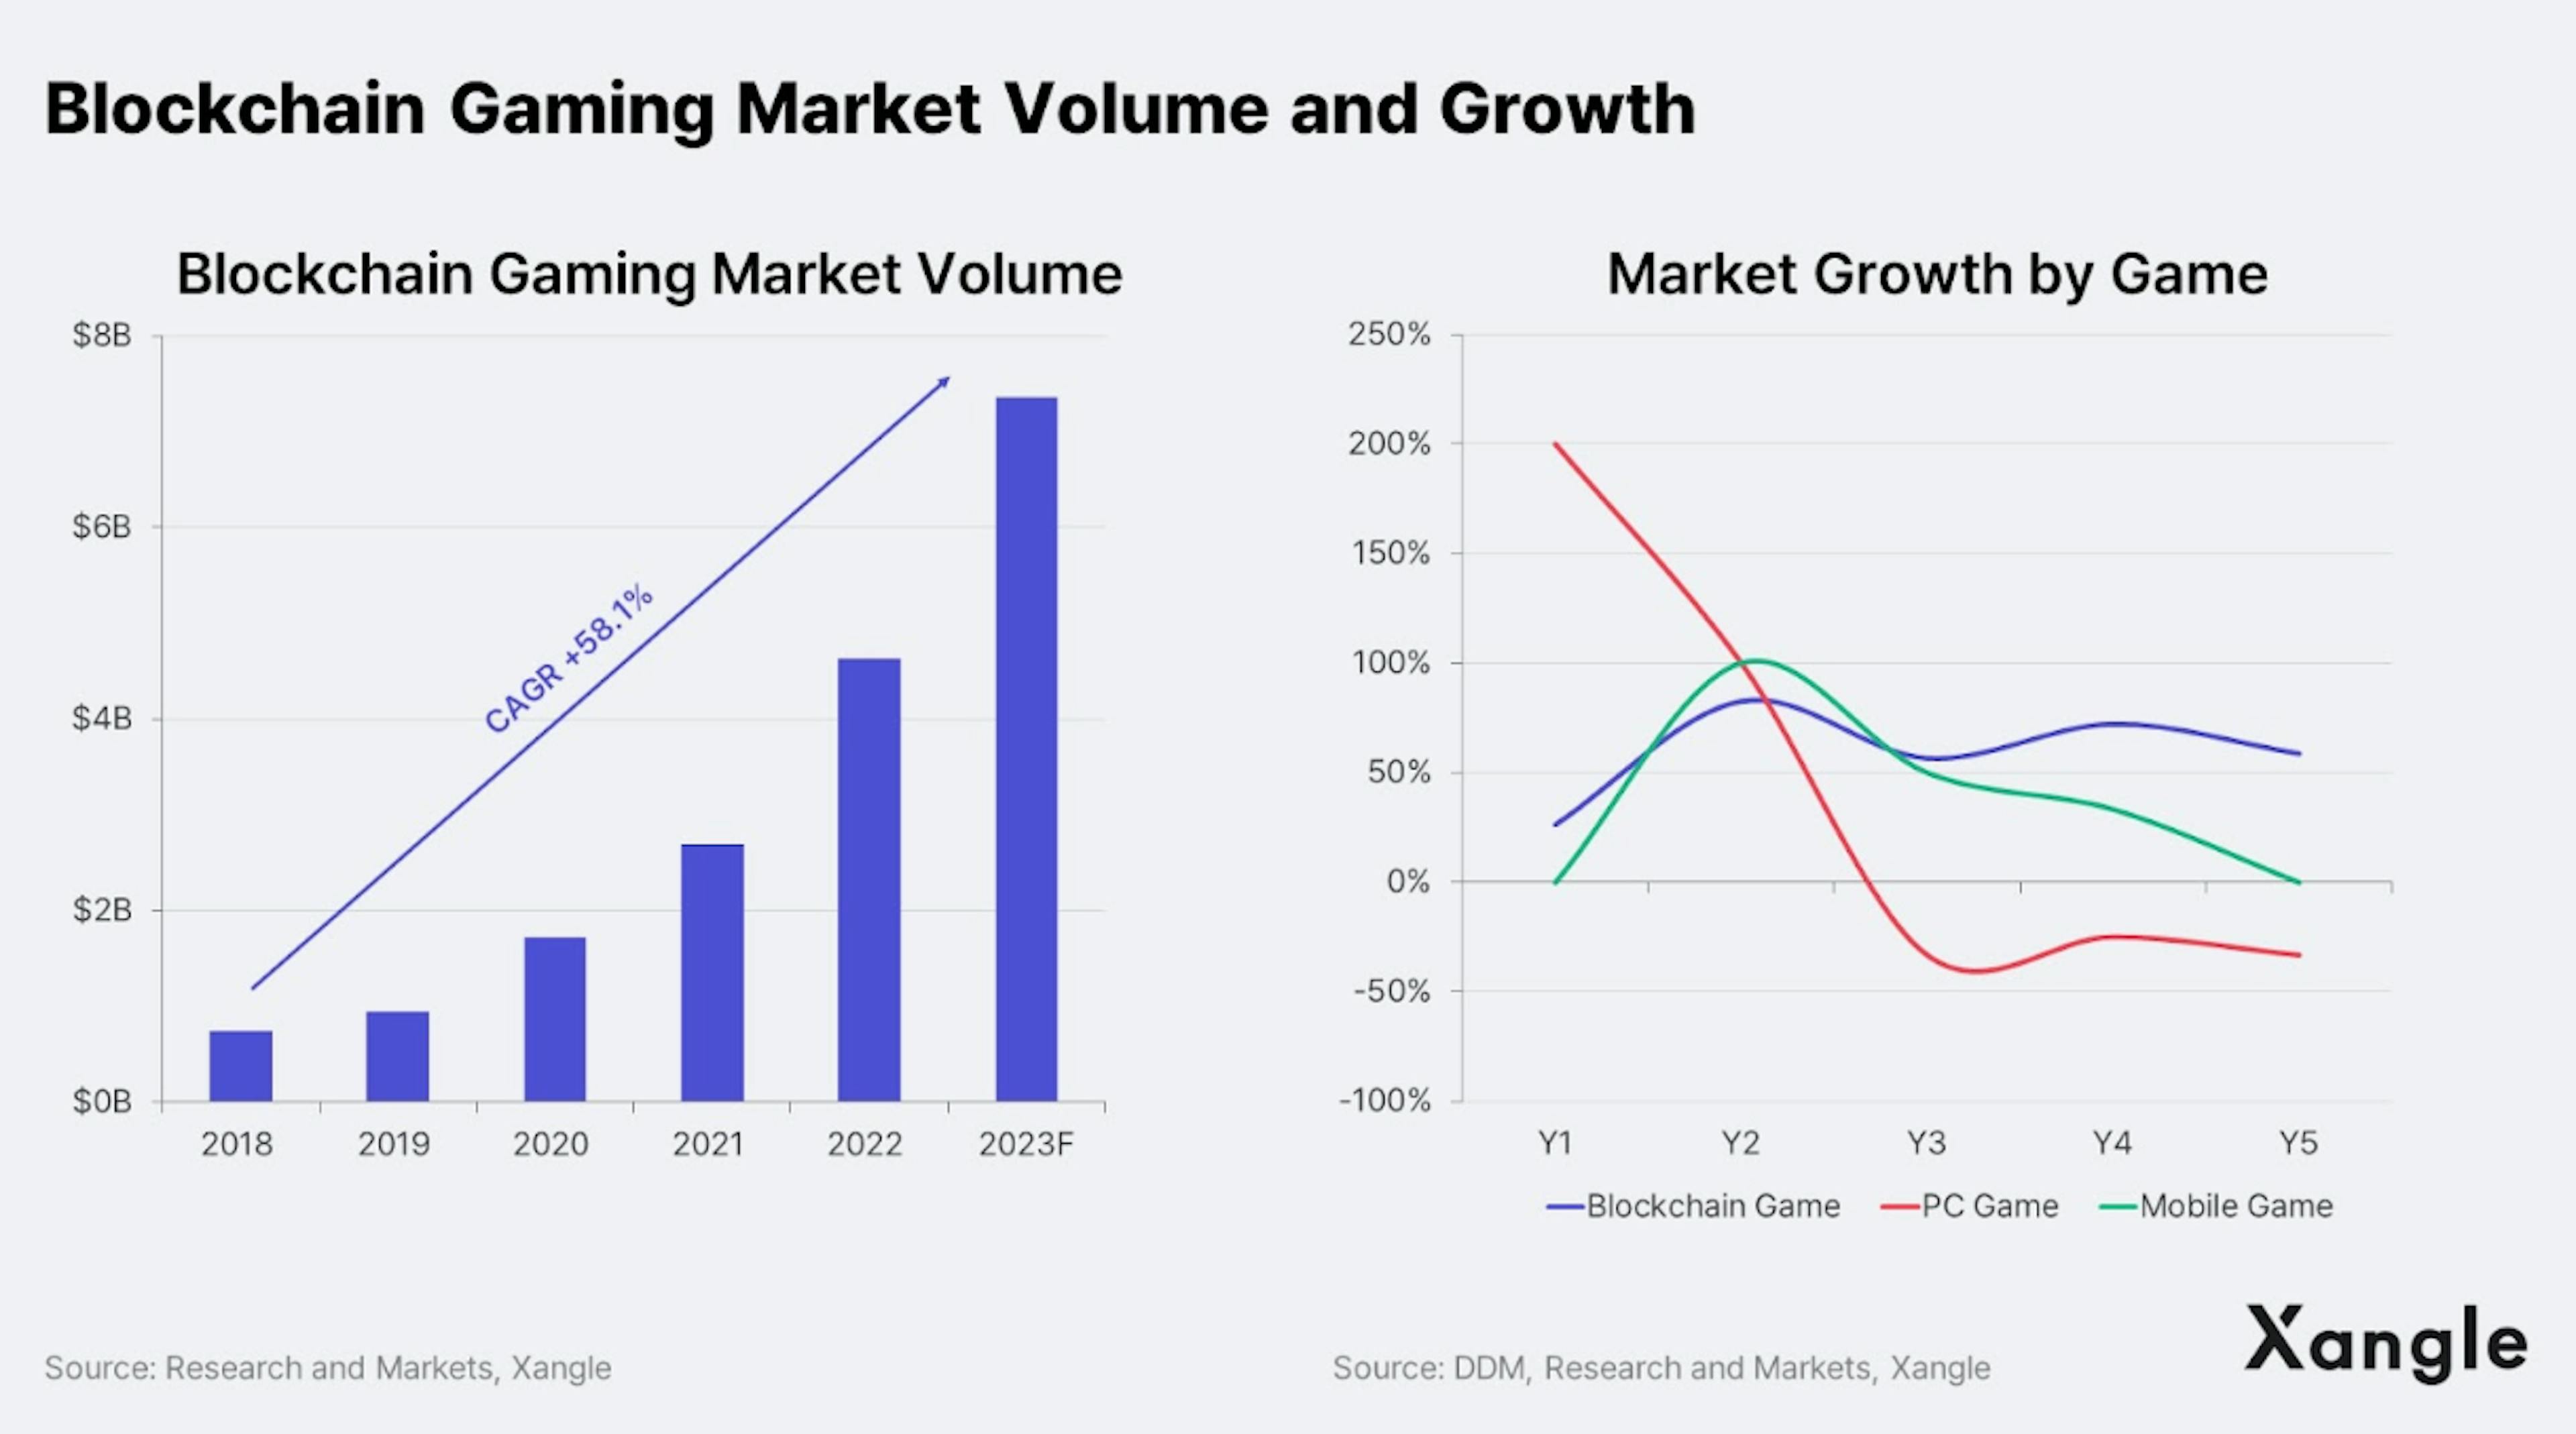 Blockchain gaming market volume and growth